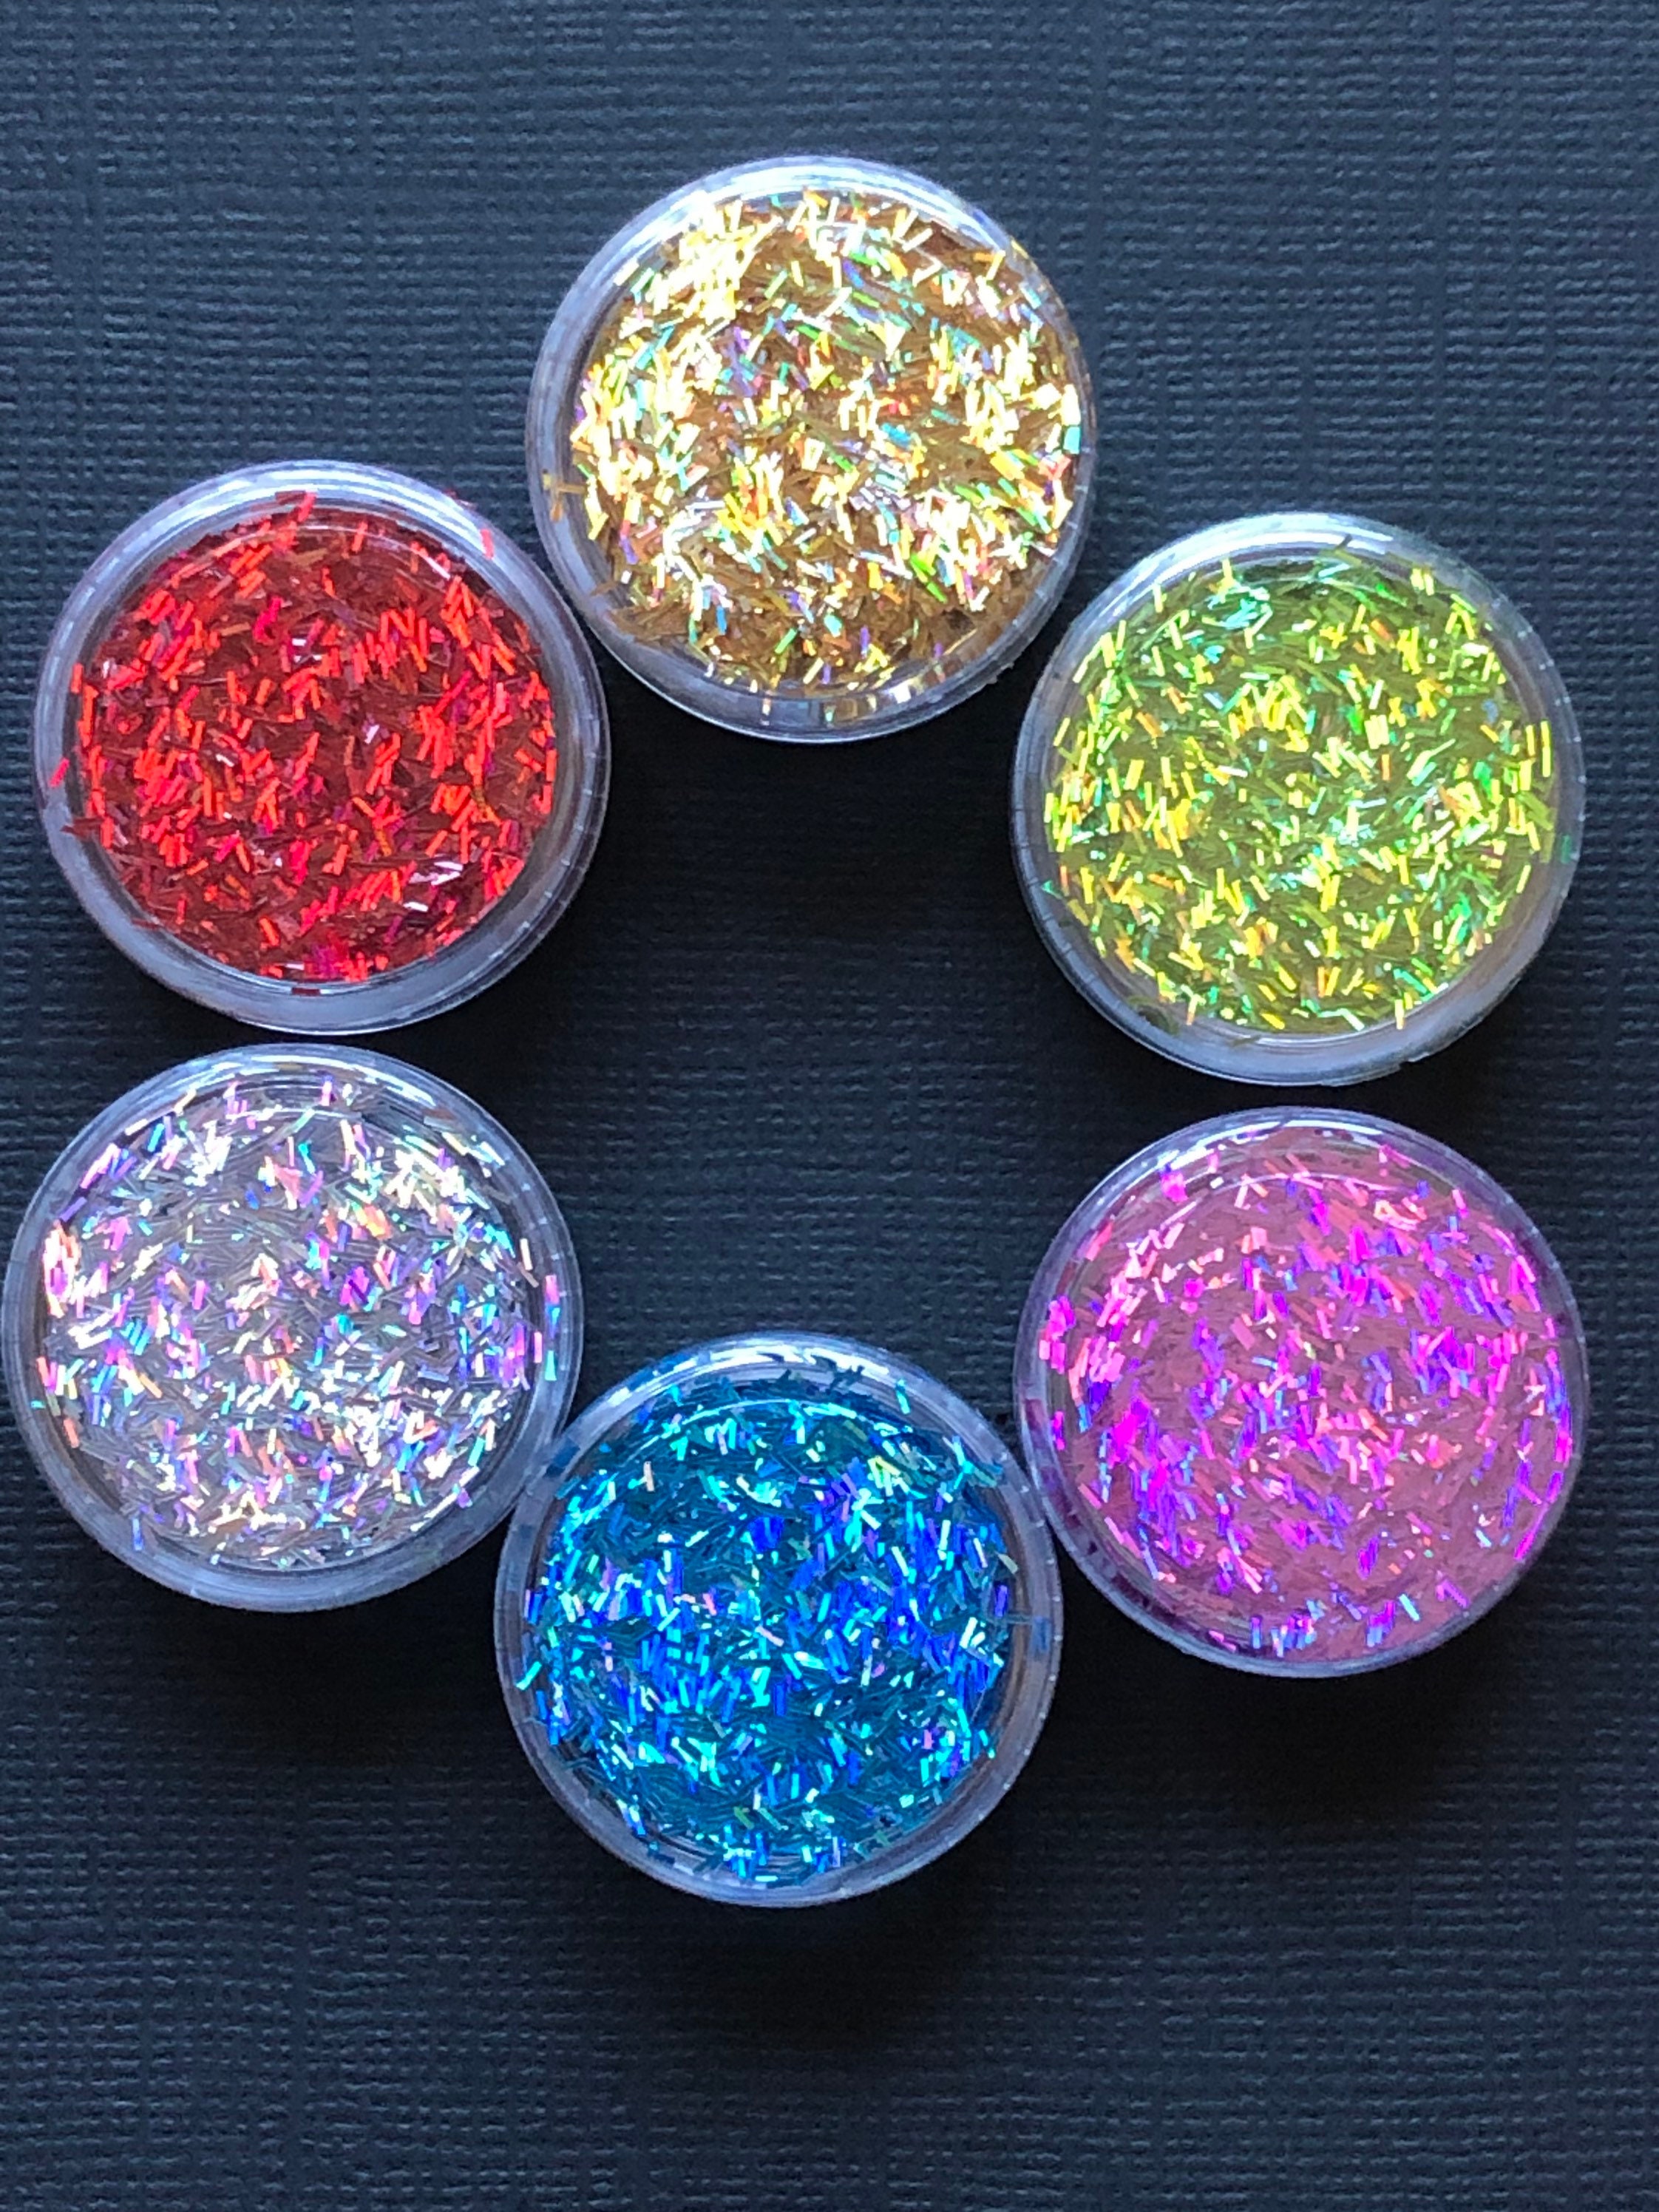 Silver Crushed Glass Glitter, Jewellery / Resin Art / Xmas Crafts